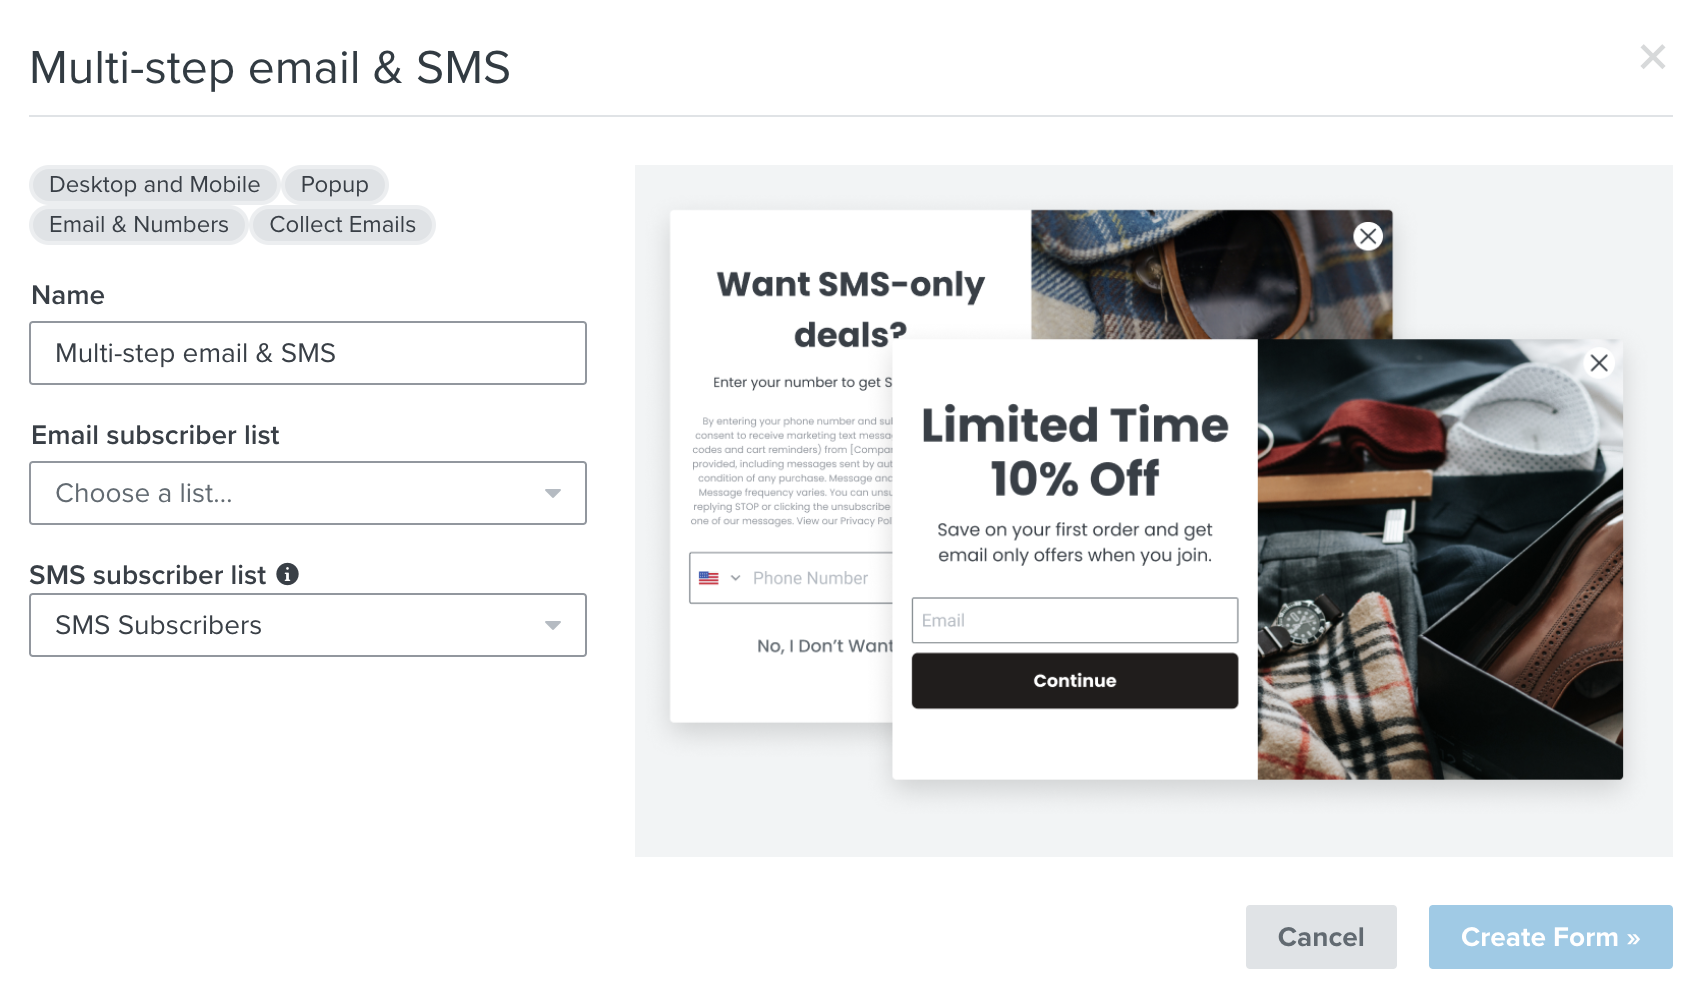 In multi-step forms from the Klaviyo form library users have the ability to choose two different lists for collecting email and SMS